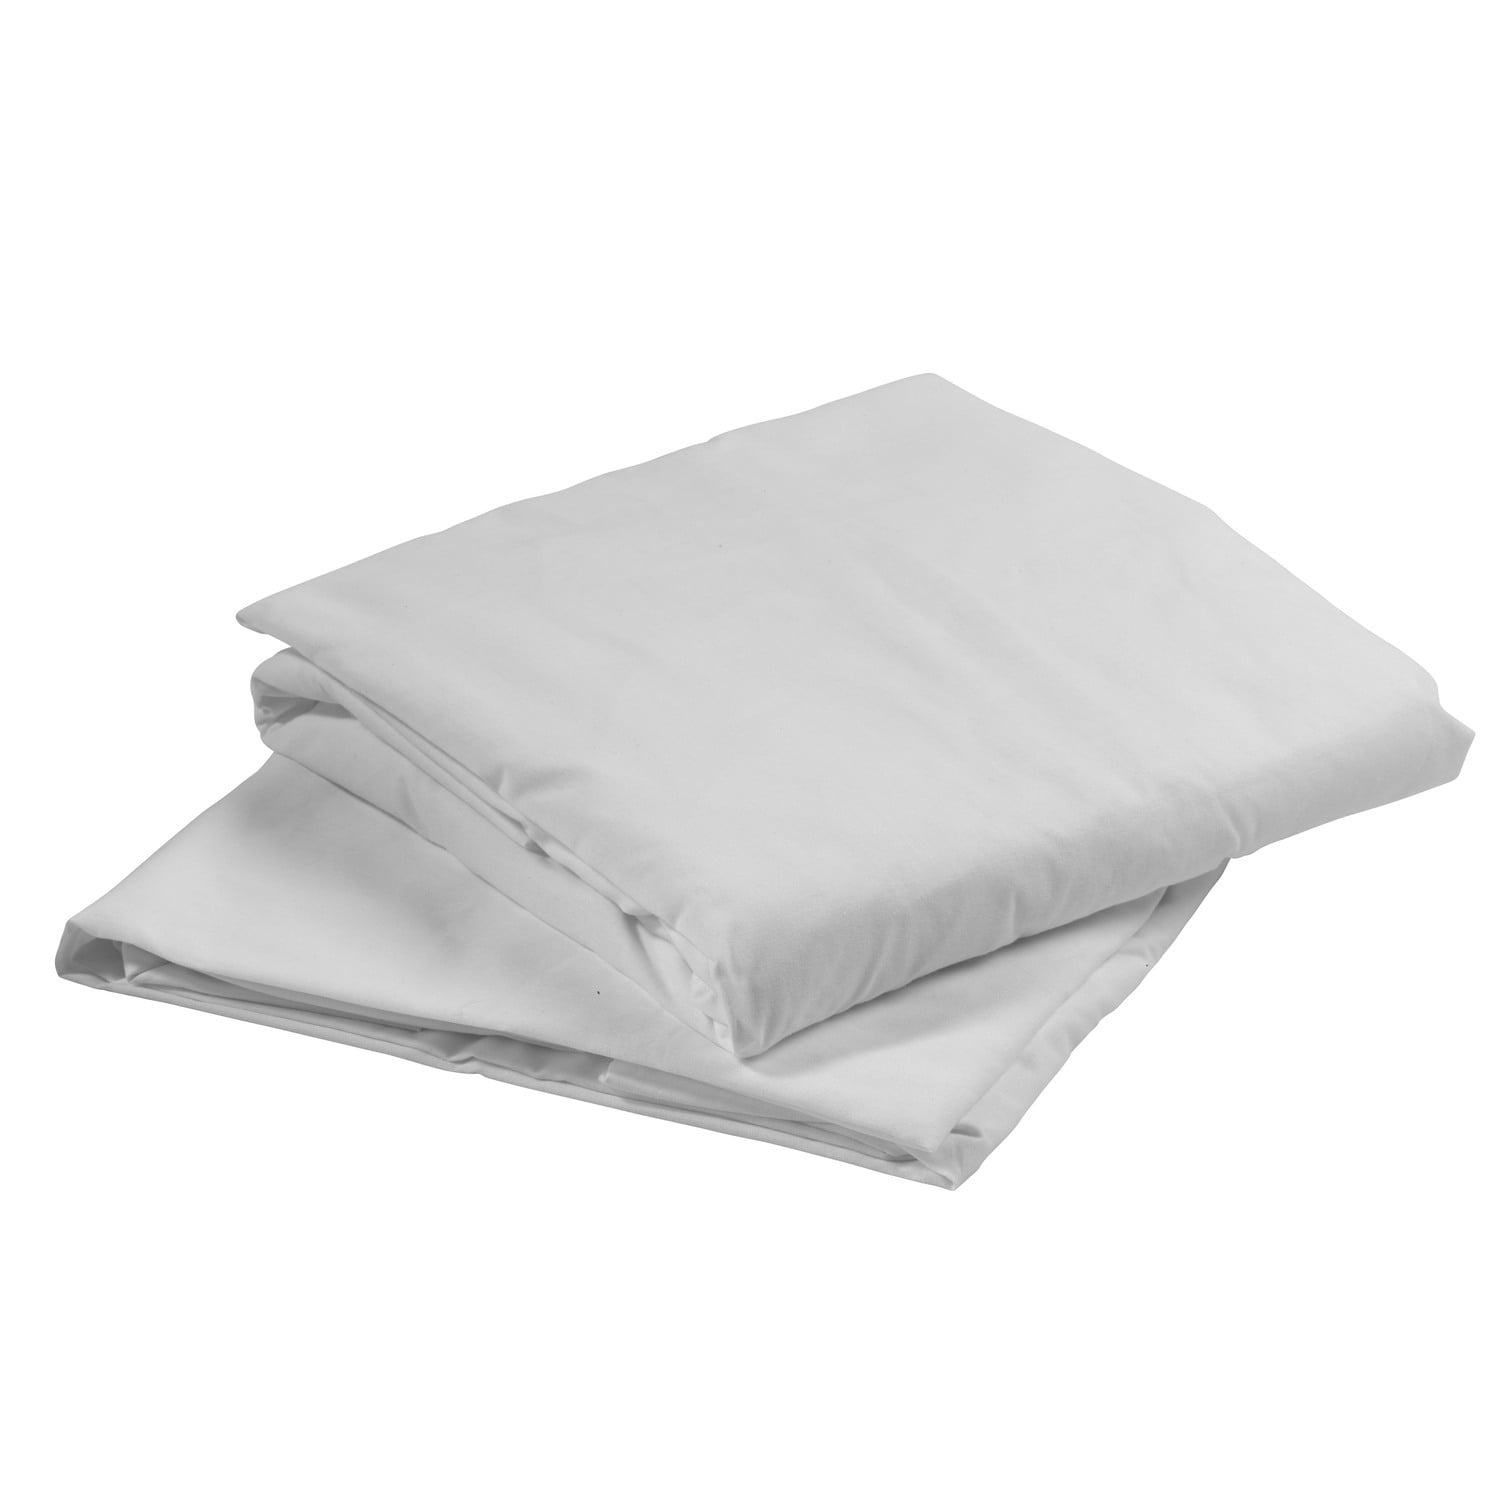 Fitted Hospital Bed Sheets Soft Knitted Jersey Sheet 36" x 84 x 14" 